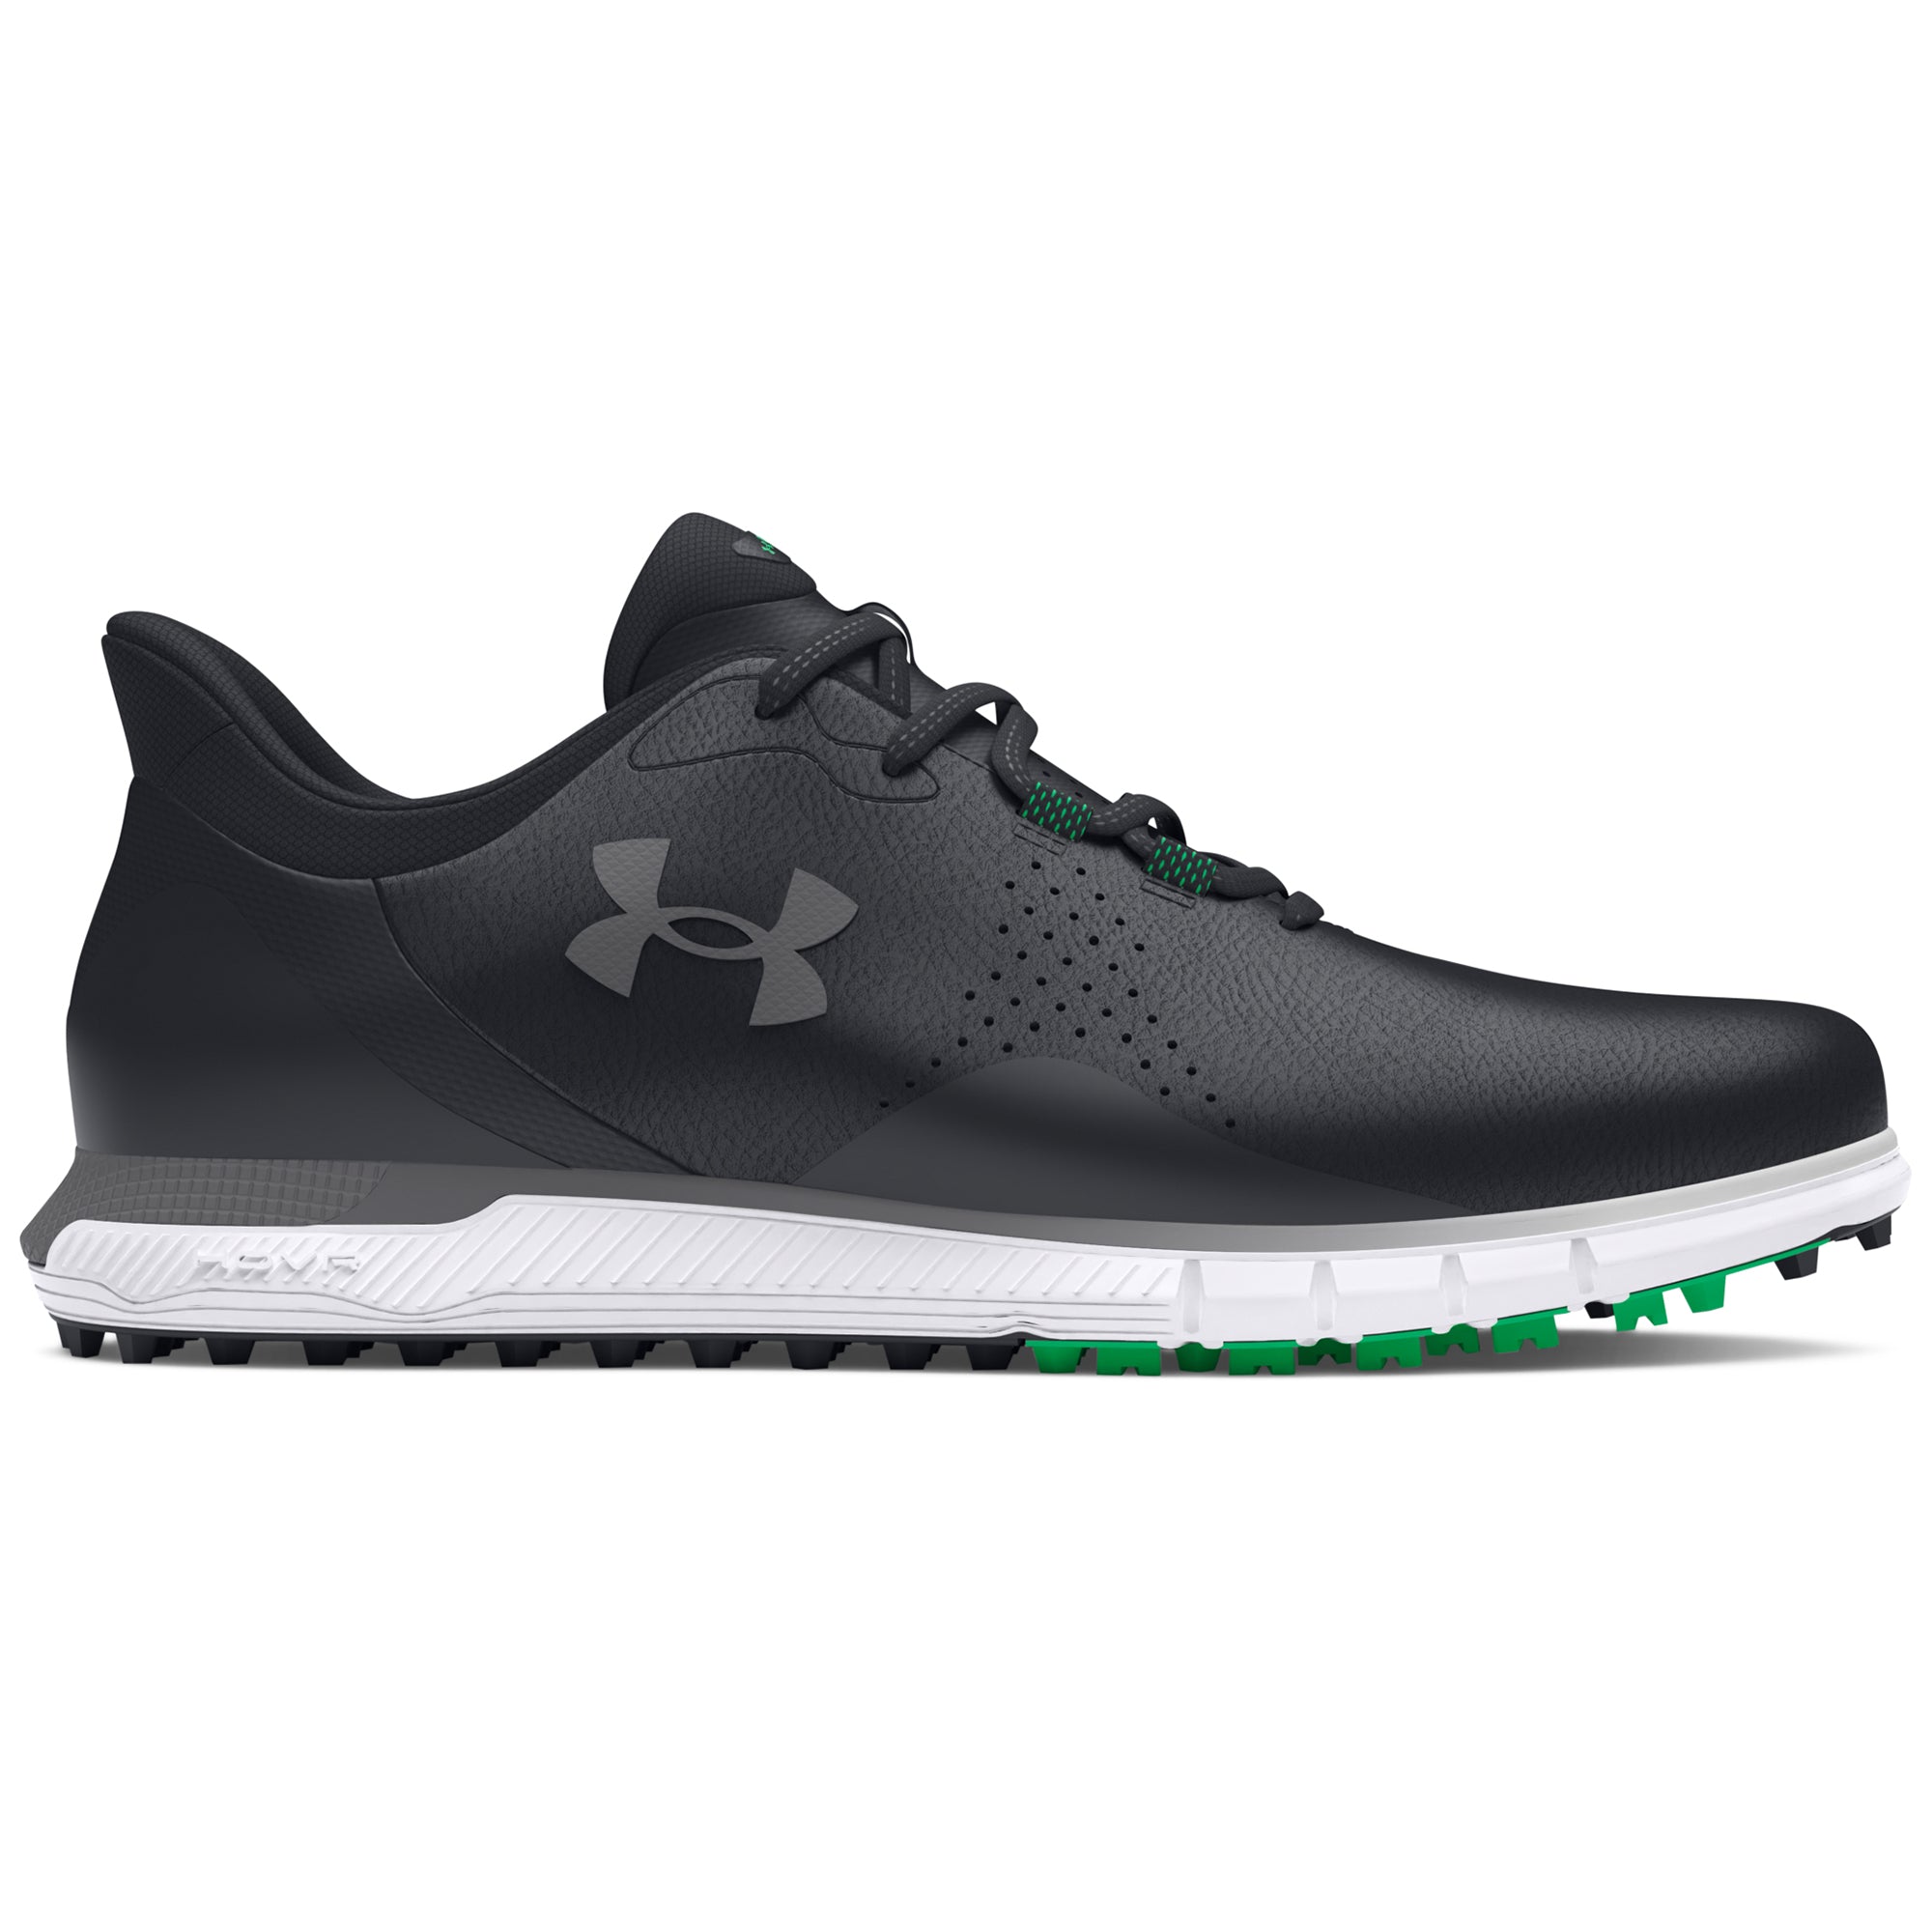 under-armour-drive-fade-sl-golf-shoes-3026922-black-001